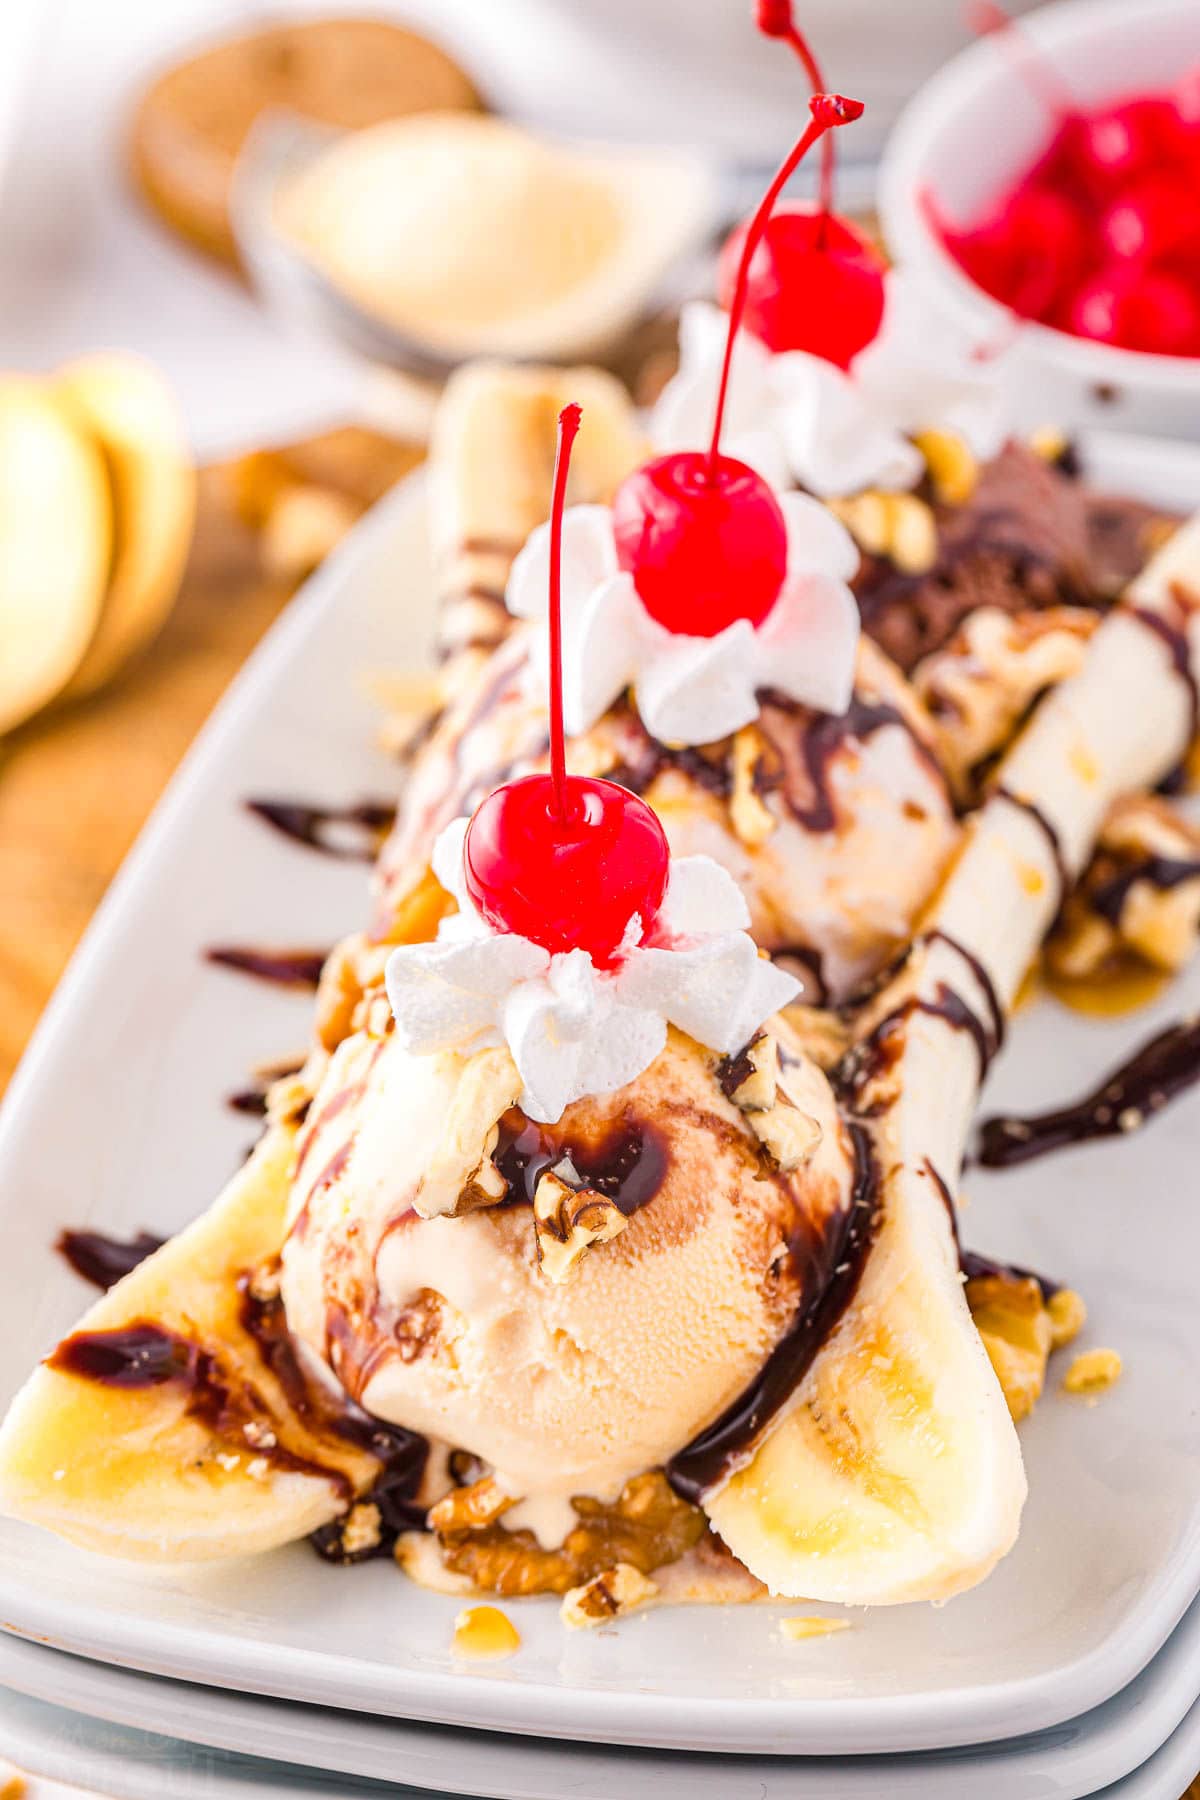 front view of an impressive banana split made on a white rectangular plate. Topped with all the classic toppings and bright red maraschino cherries.